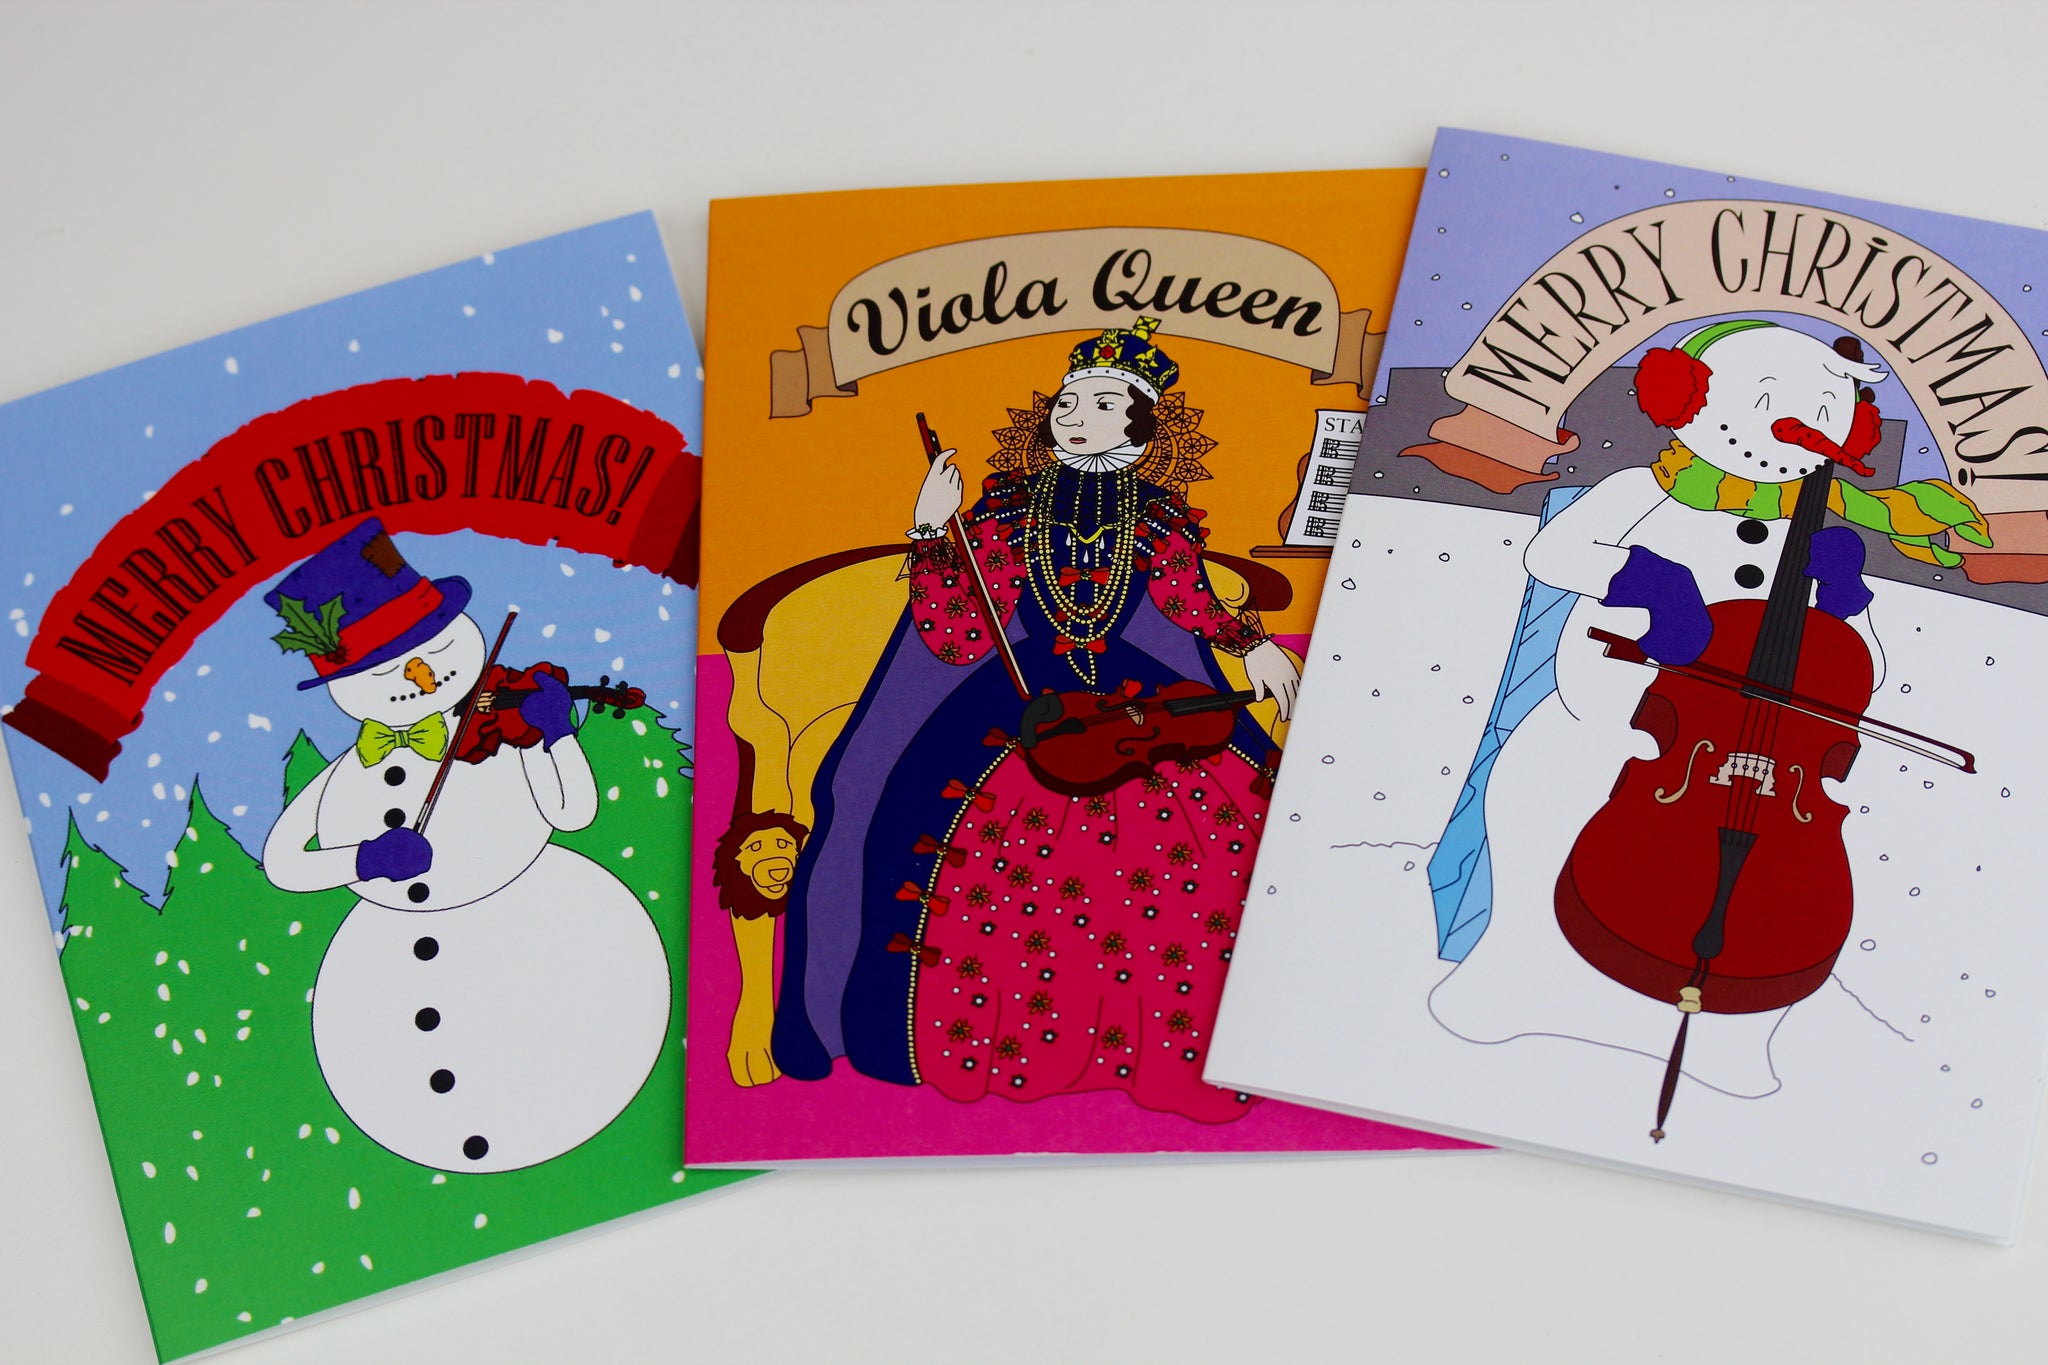 Merry Christmas Cellist, Merry Christmas Violinist, Viola Queen Card Gift Box